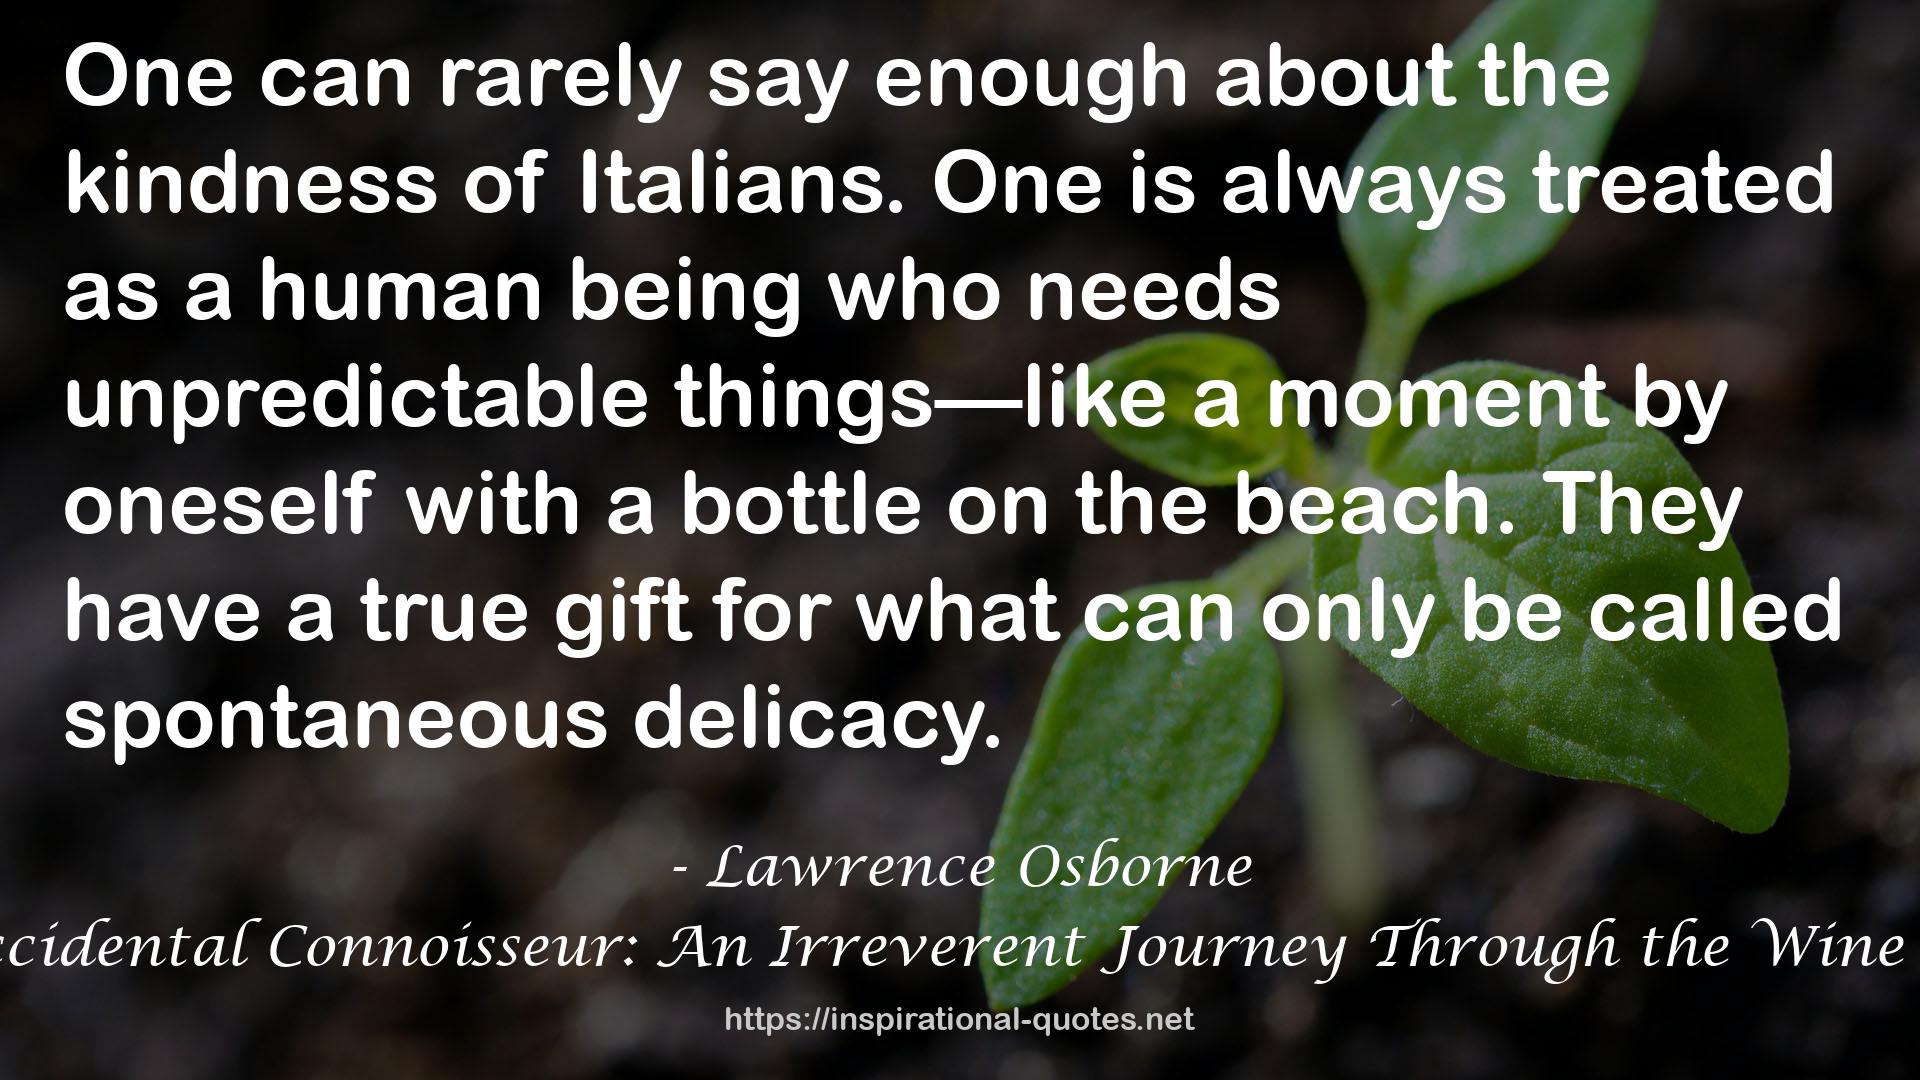 The Accidental Connoisseur: An Irreverent Journey Through the Wine World QUOTES